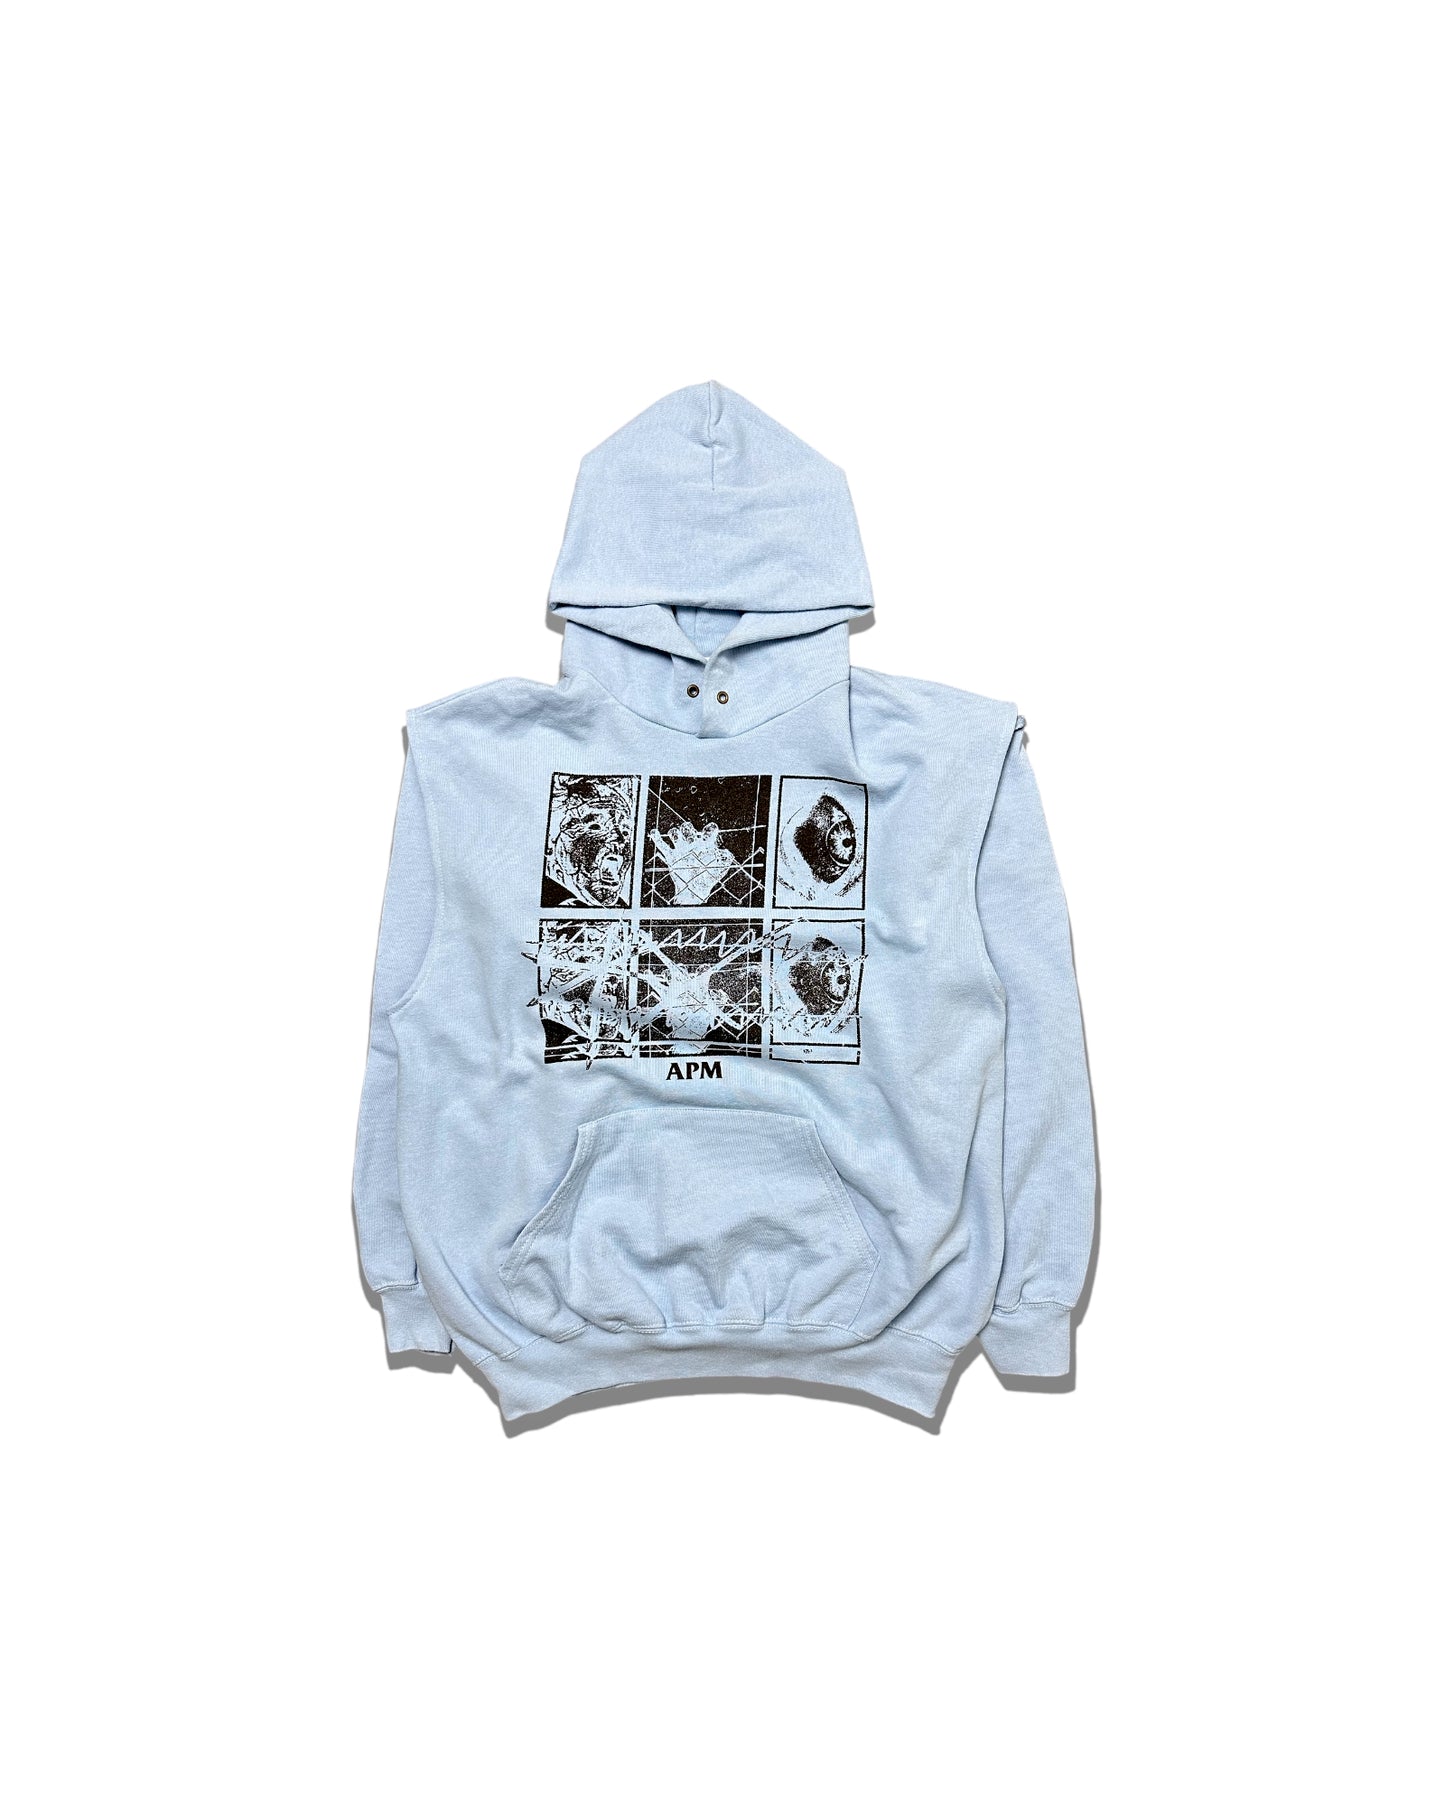 LIFE IN A CAGE HOODIE - BLUE